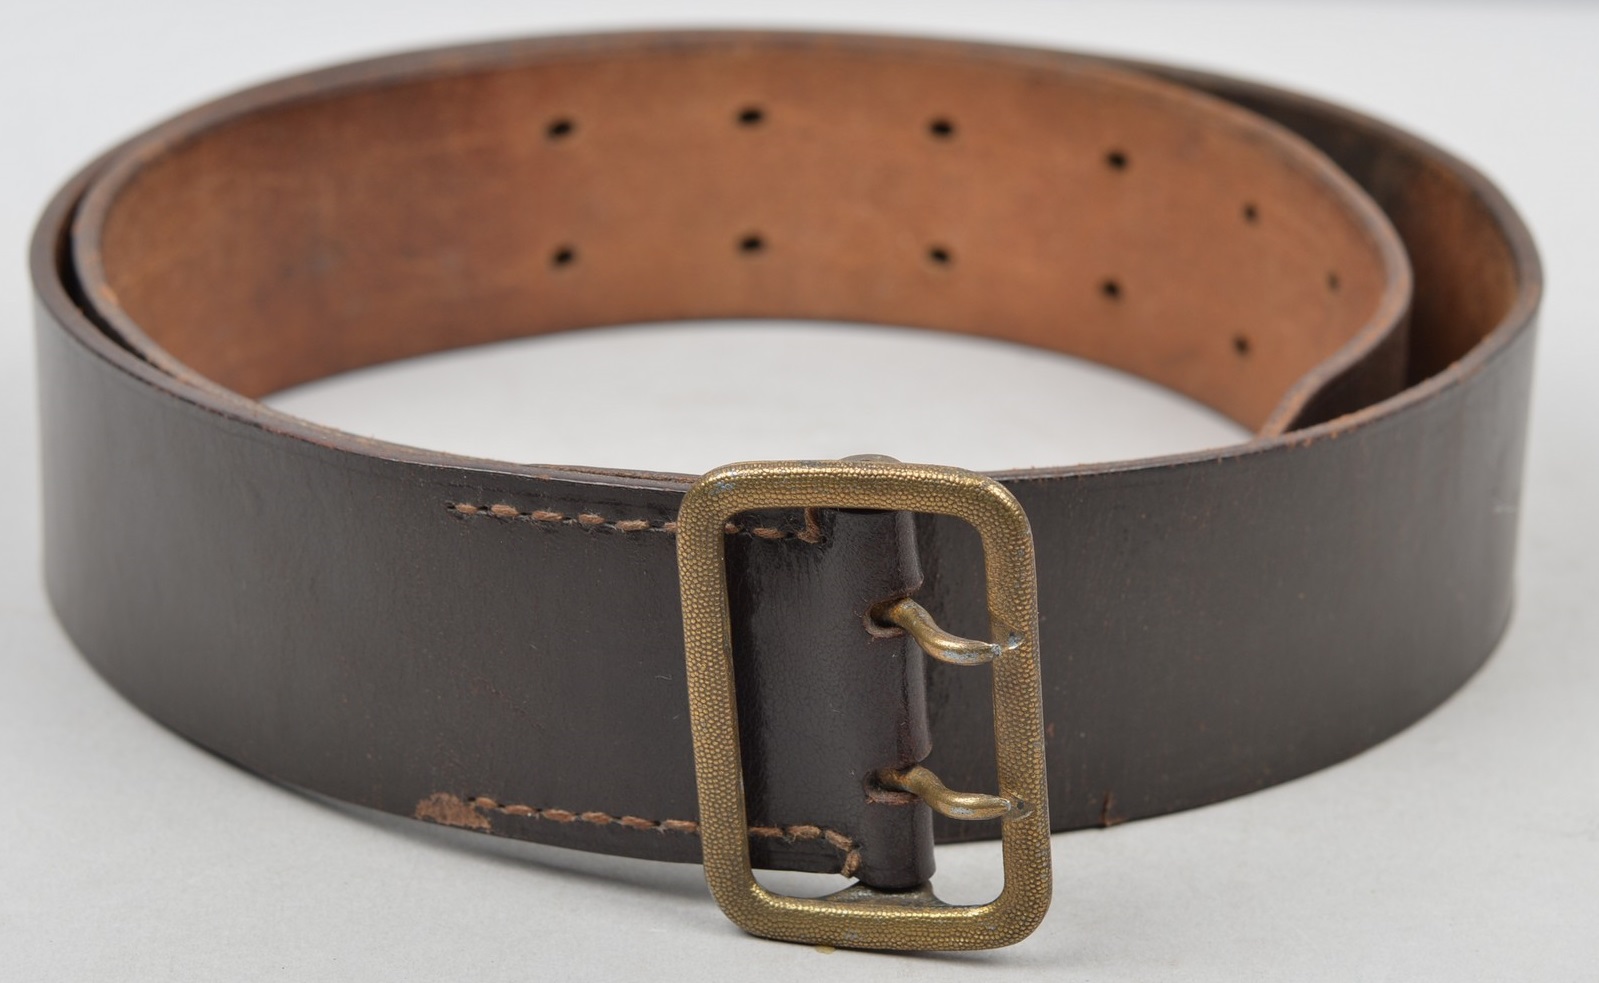 NSDAP/SA Dark Brown Leather Belt and Guilt Doubbleclaw Buckle